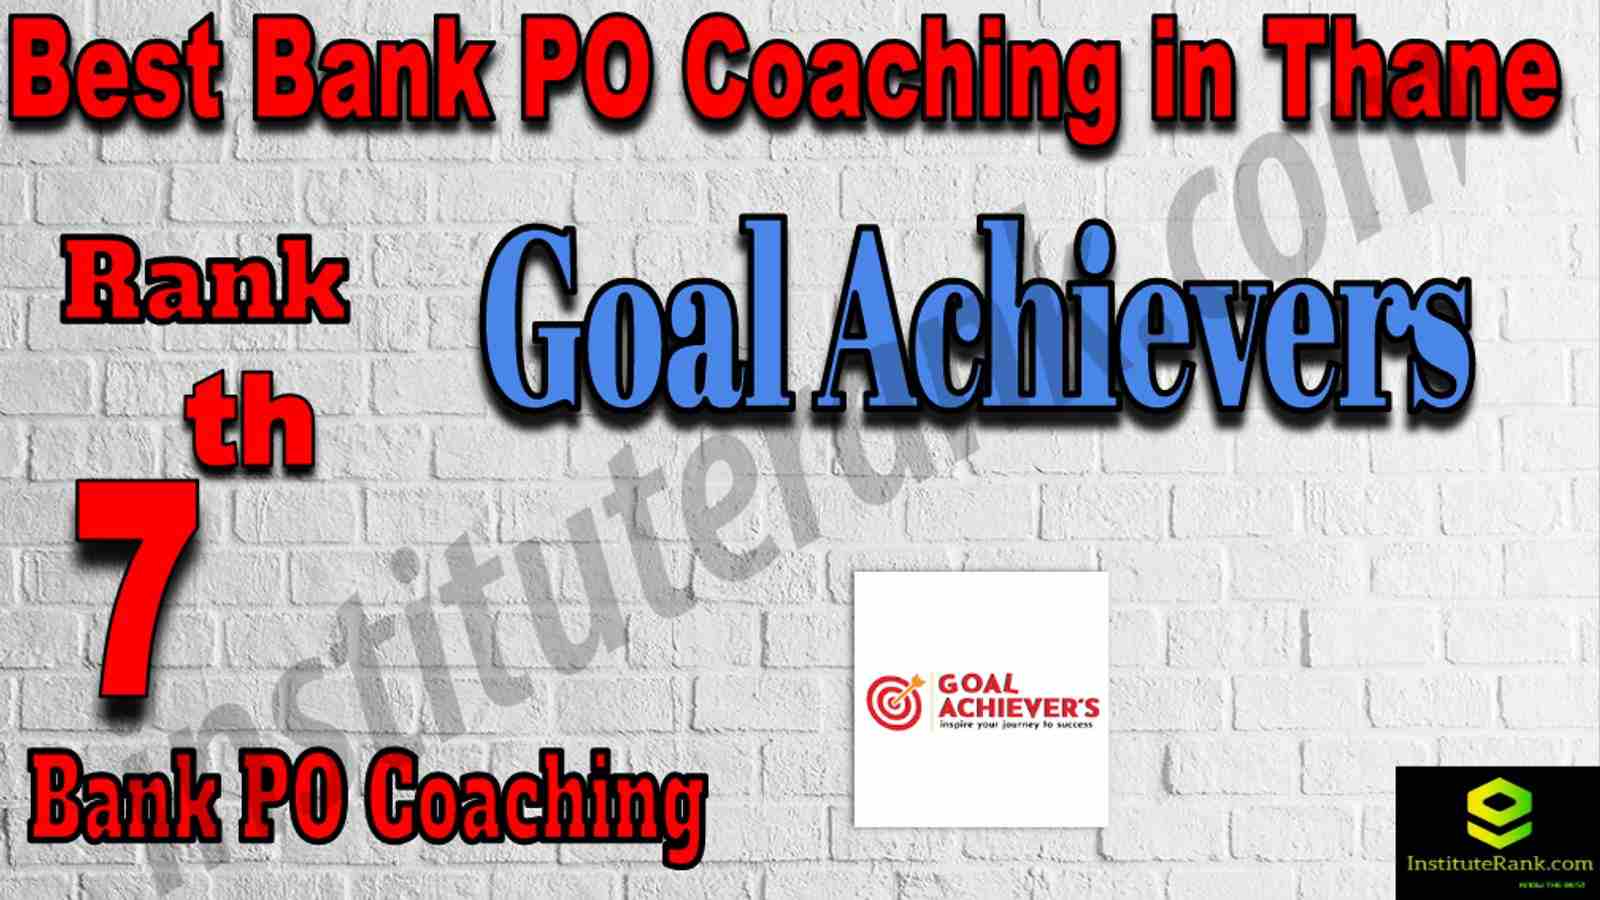 7th Best Bank PO Coaching in Thane